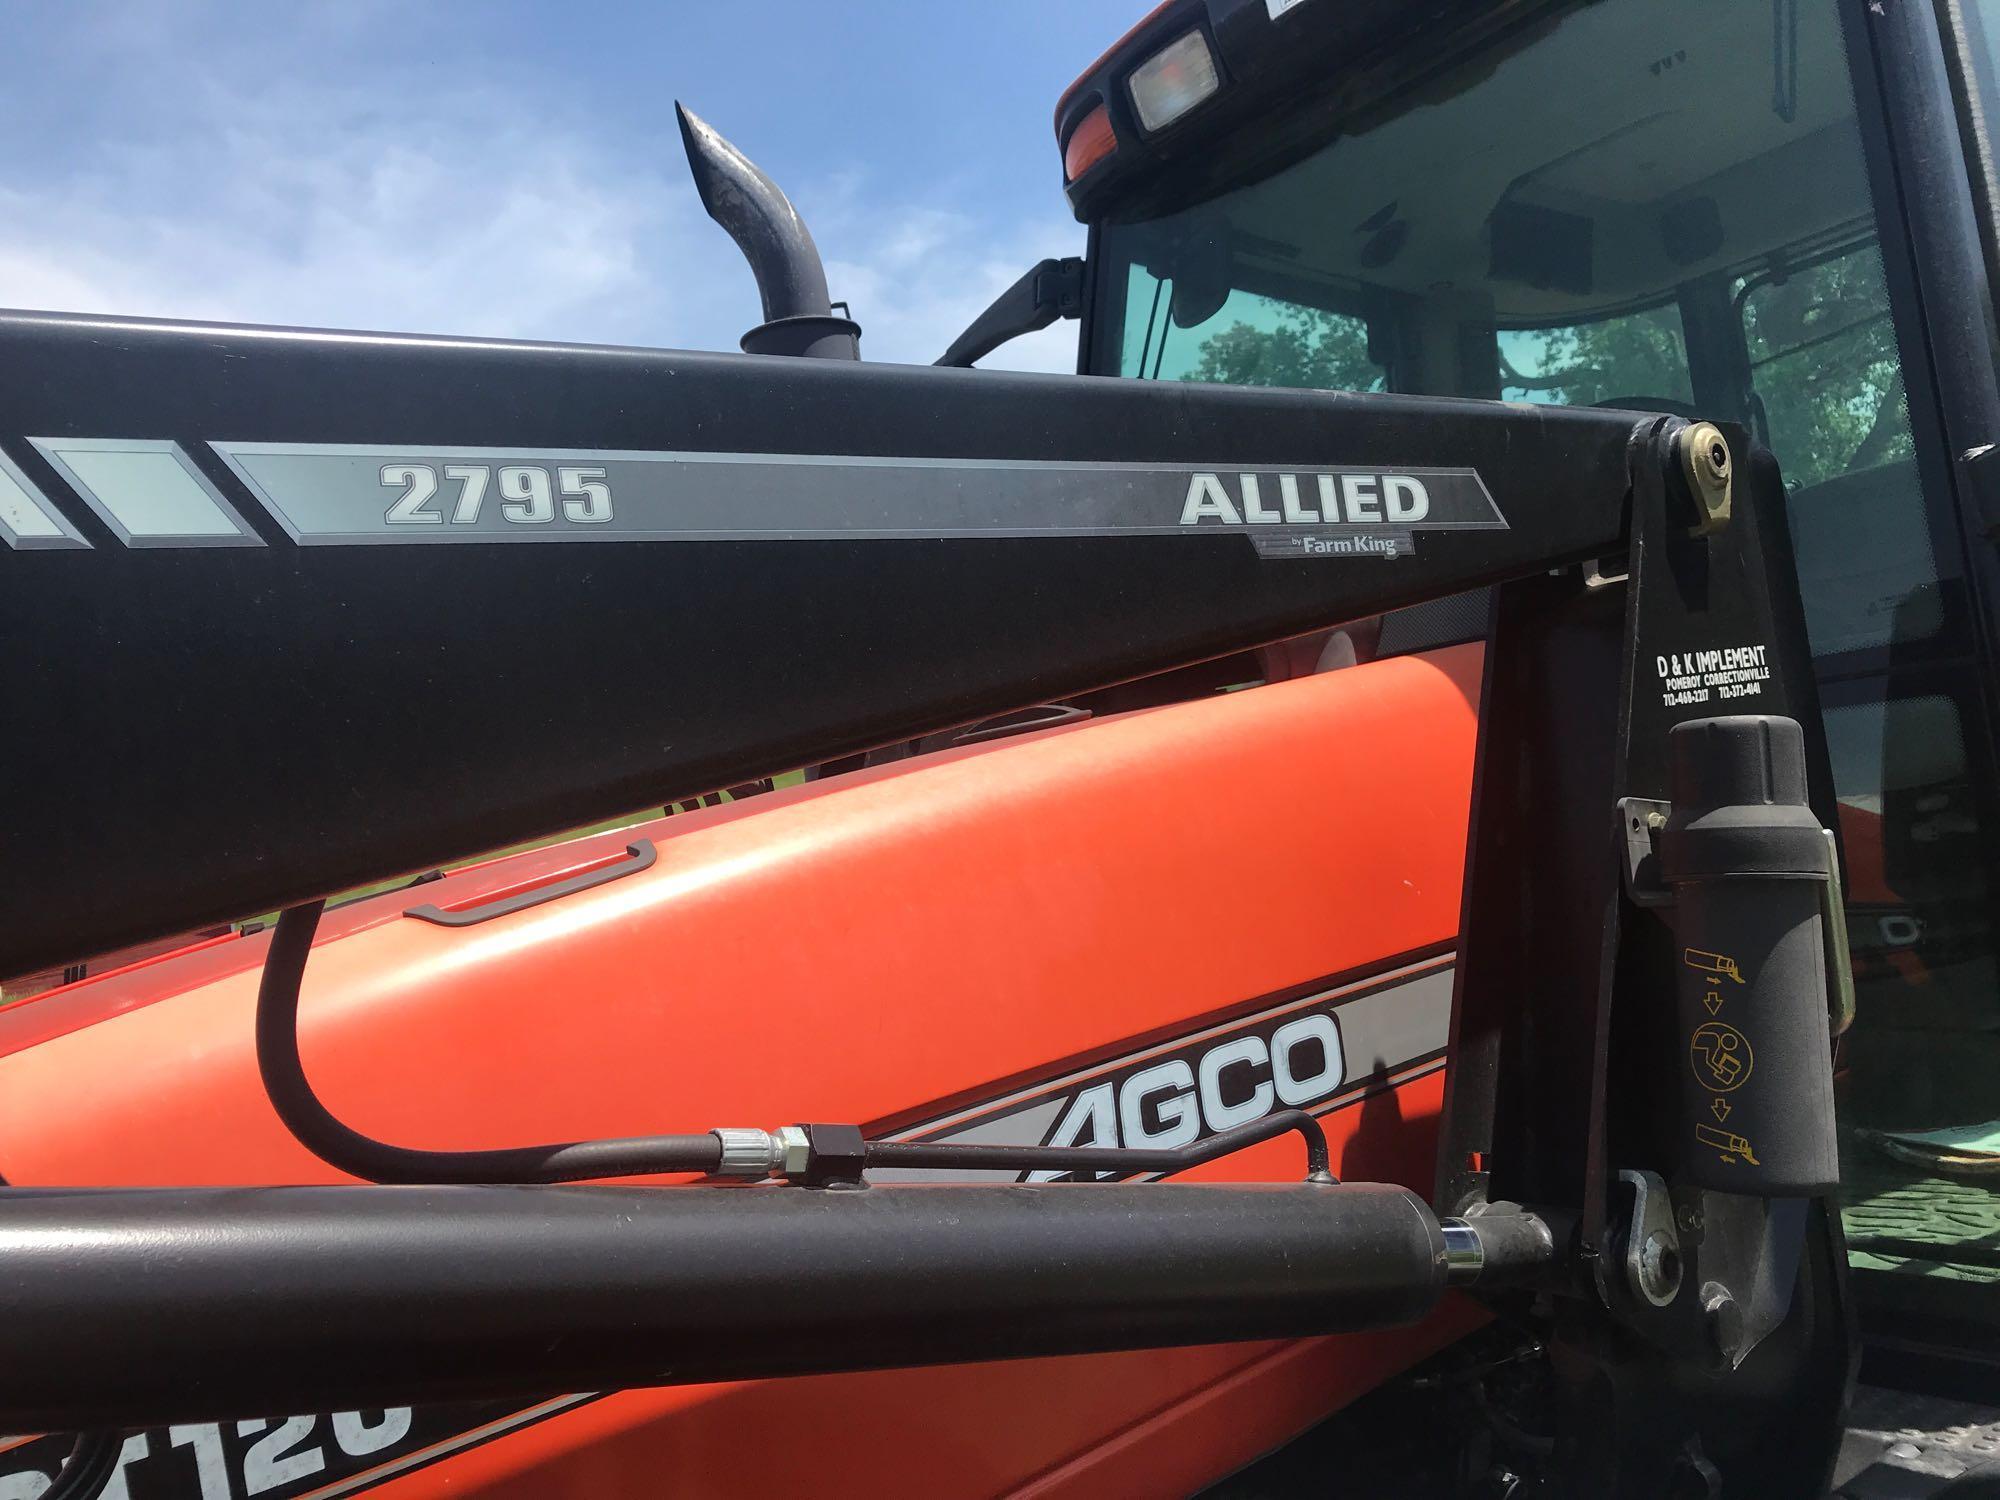 2010 AGCO RT 120, 1290 hours, powershift, MFD, 3pt., 4 outlets, CAH, excellent condition, Michelin